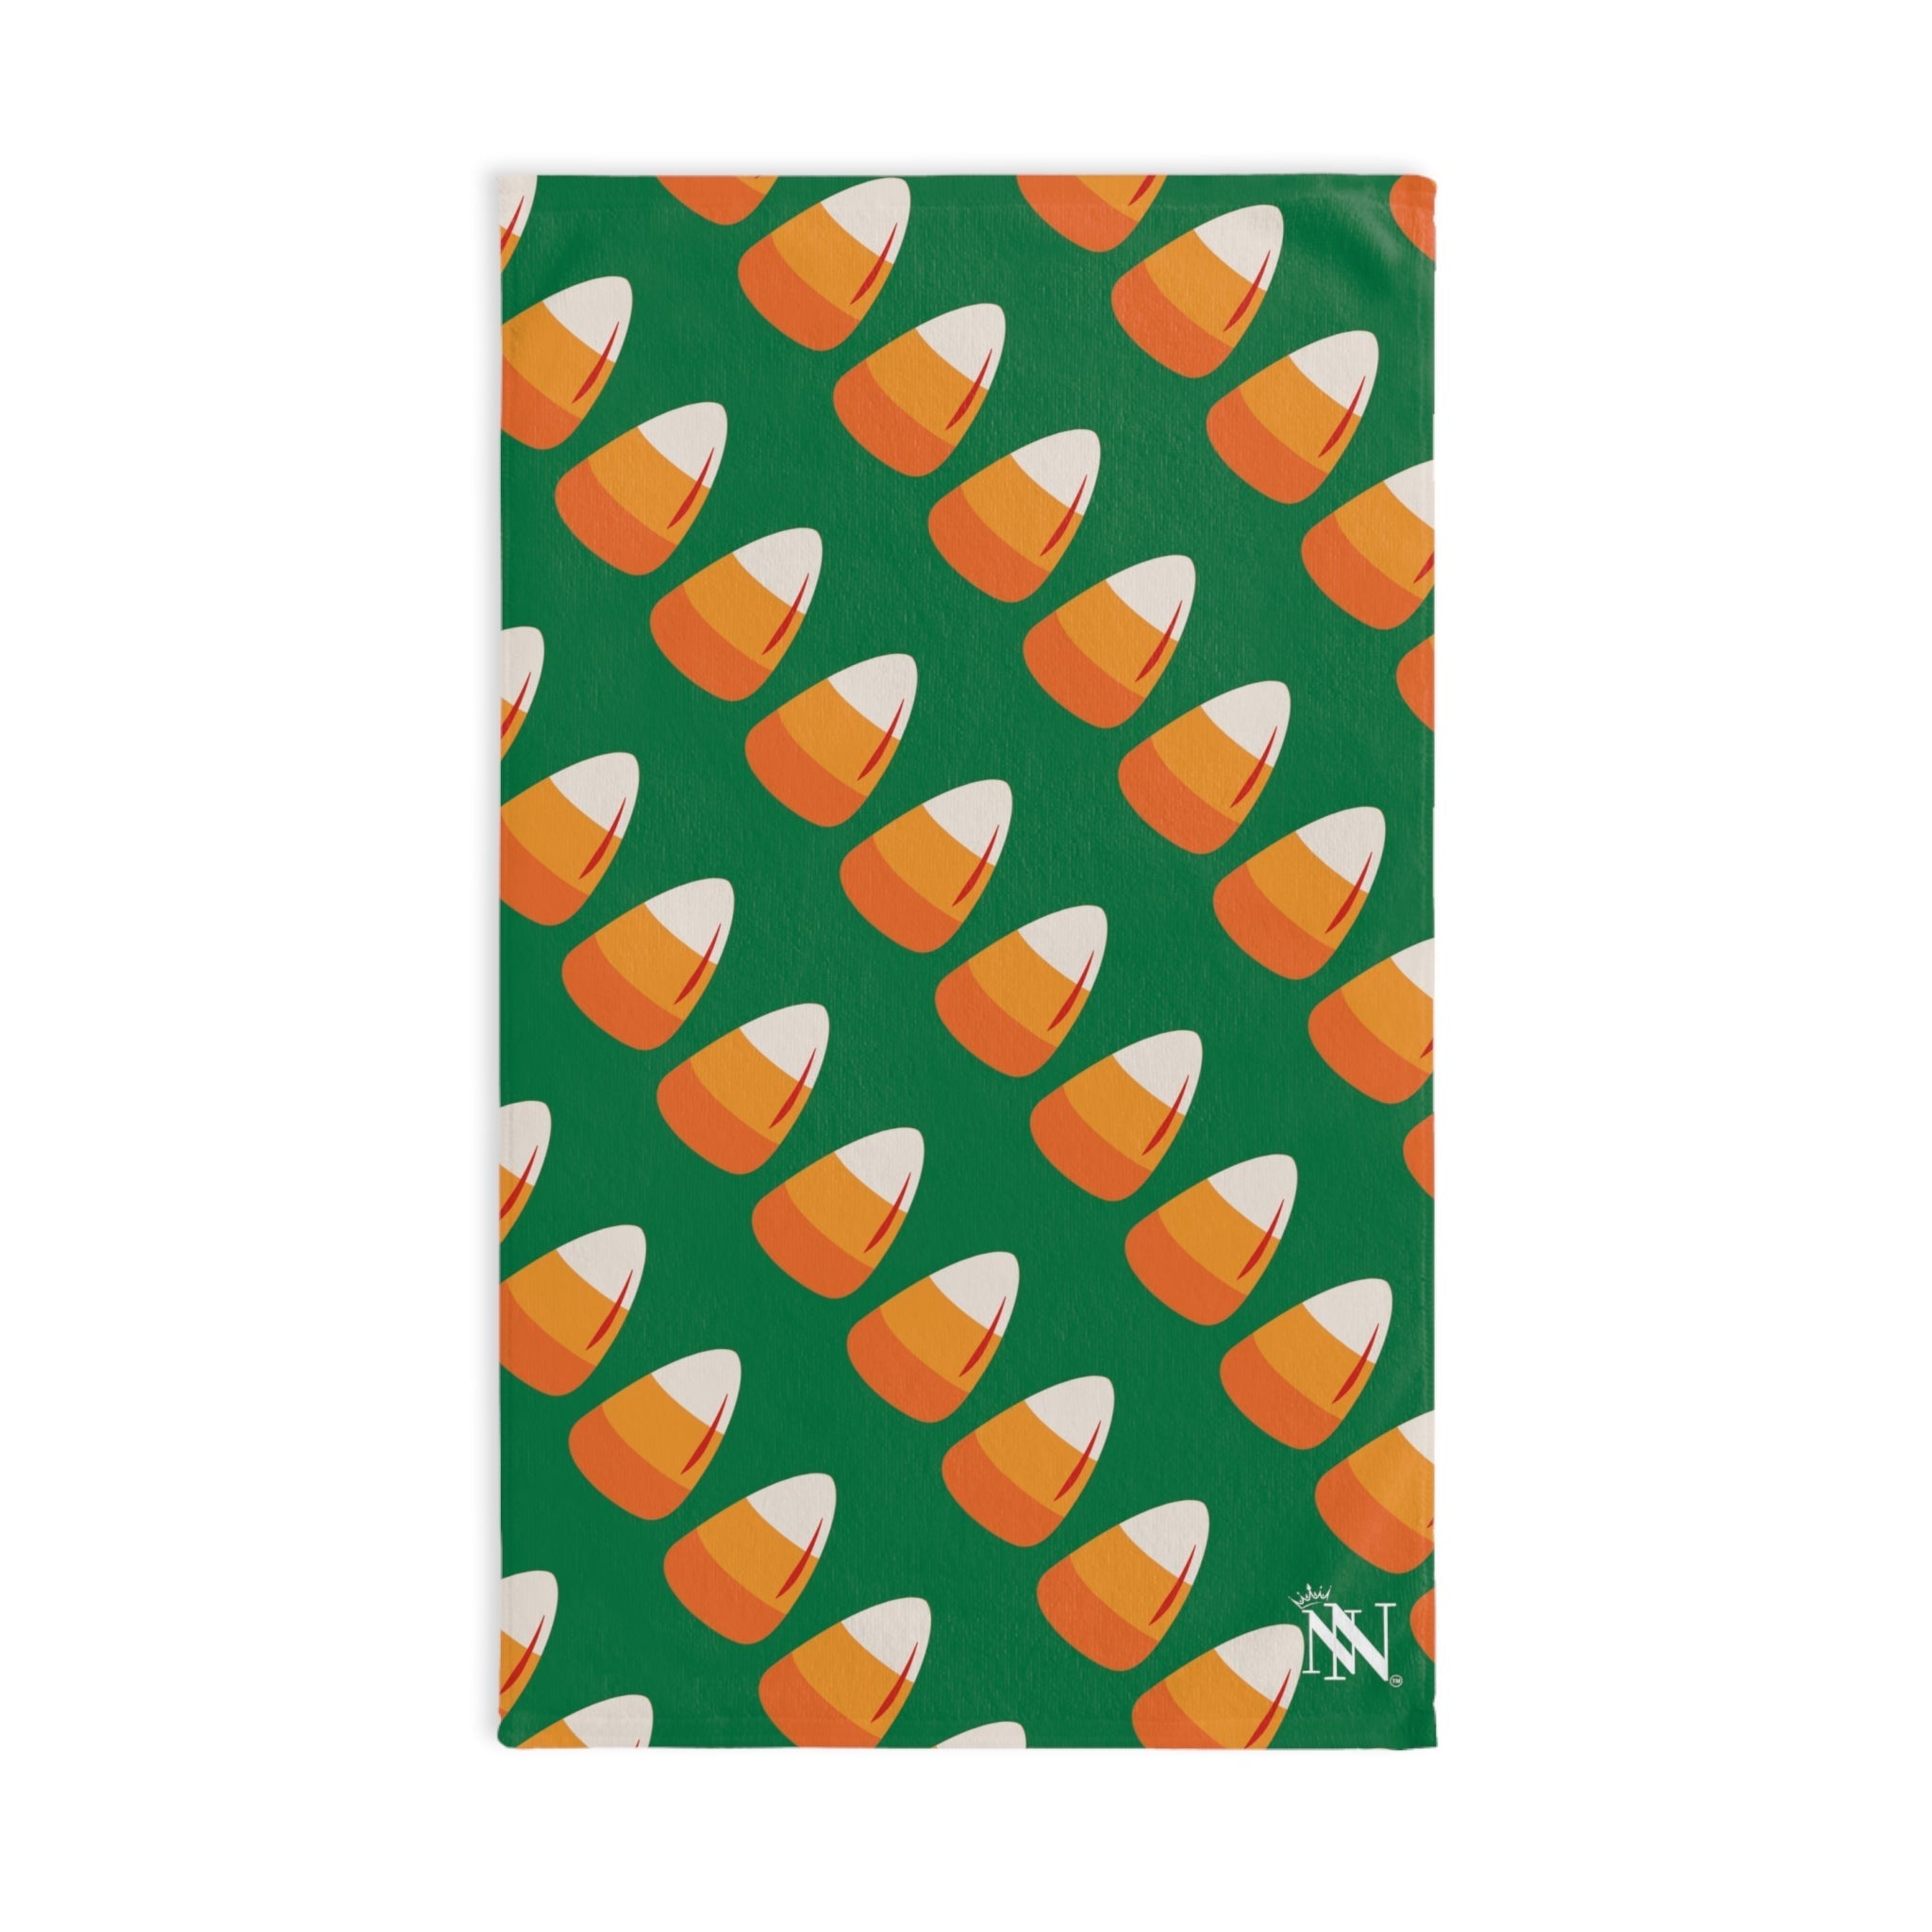 Candy Corn Green | Anniversary Wedding, Christmas, Valentines Day, Birthday Gifts for Him, Her, Romantic Gifts for Wife, Girlfriend, Couples Gifts for Boyfriend, Husband NECTAR NAPKINS